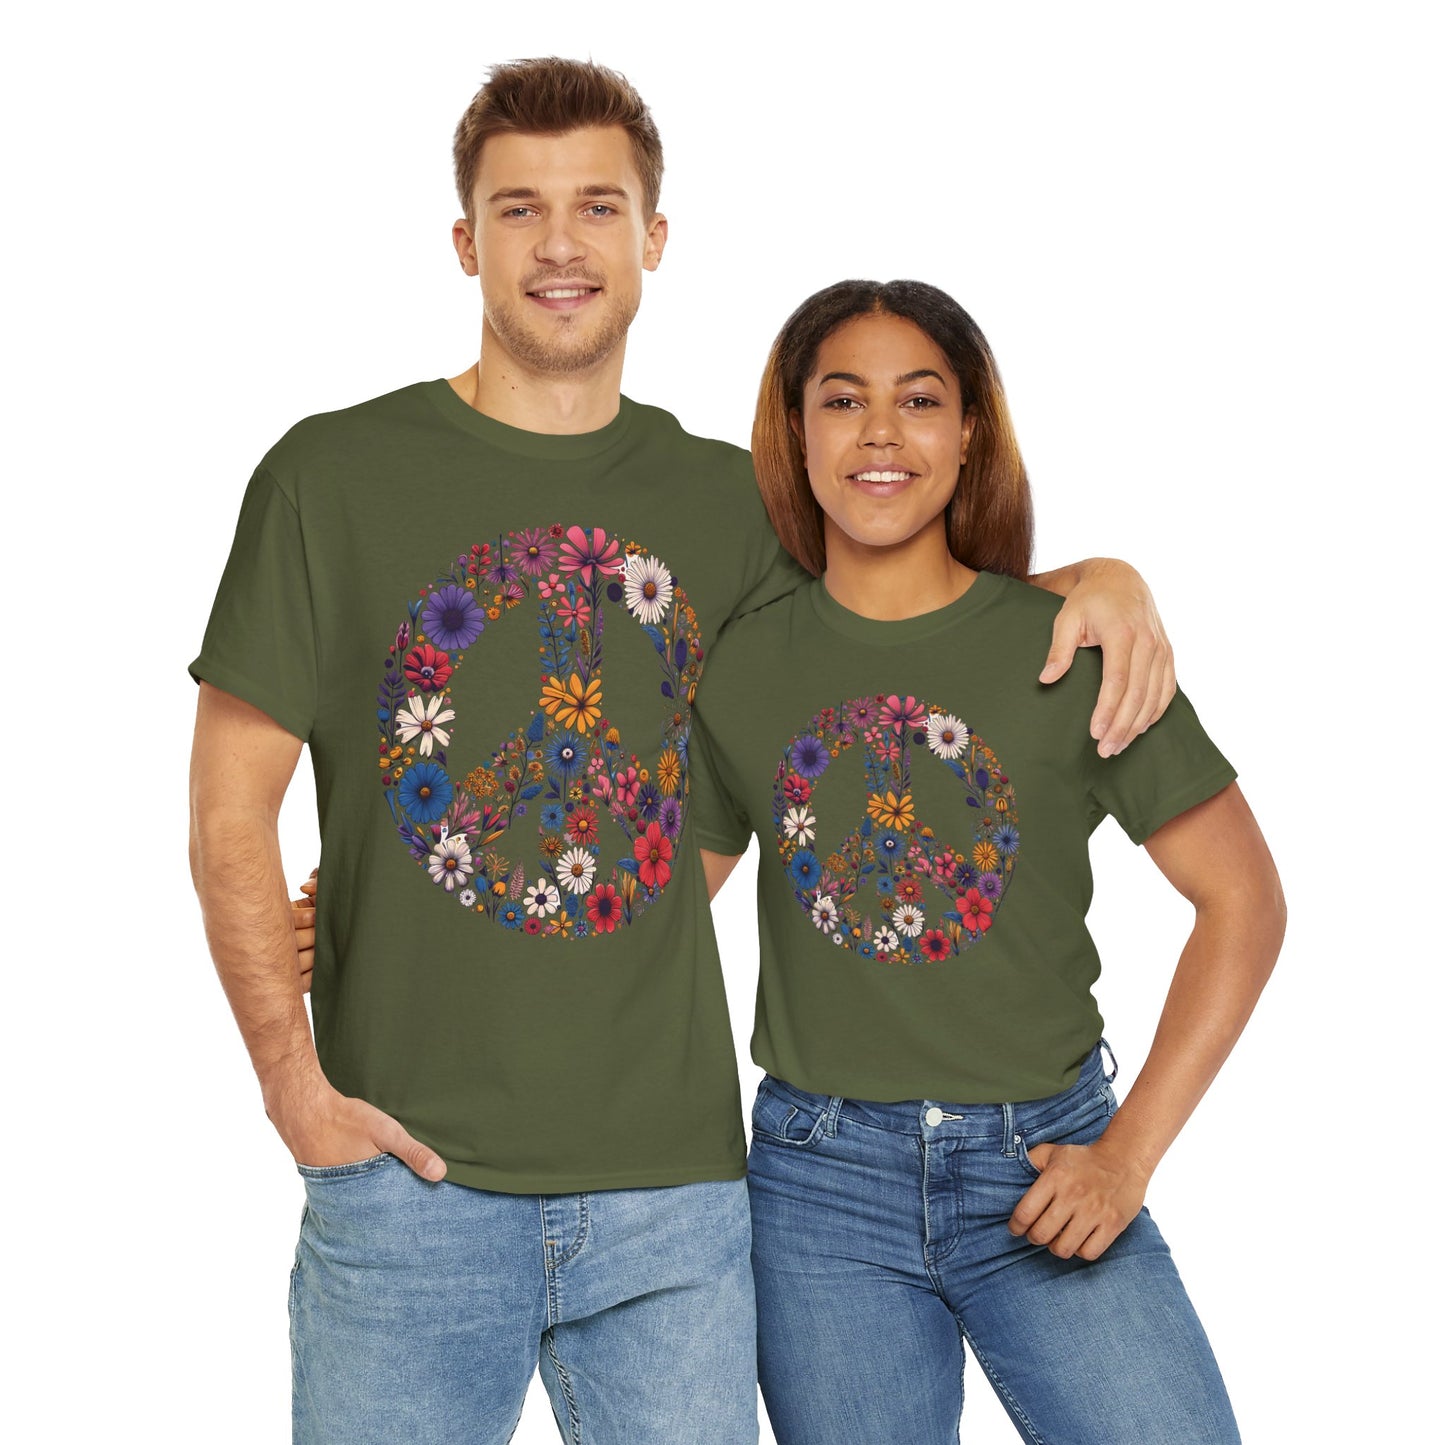 Wildflower Peace Sign T-Shirt, Flower TShirt, Earth Day Tee